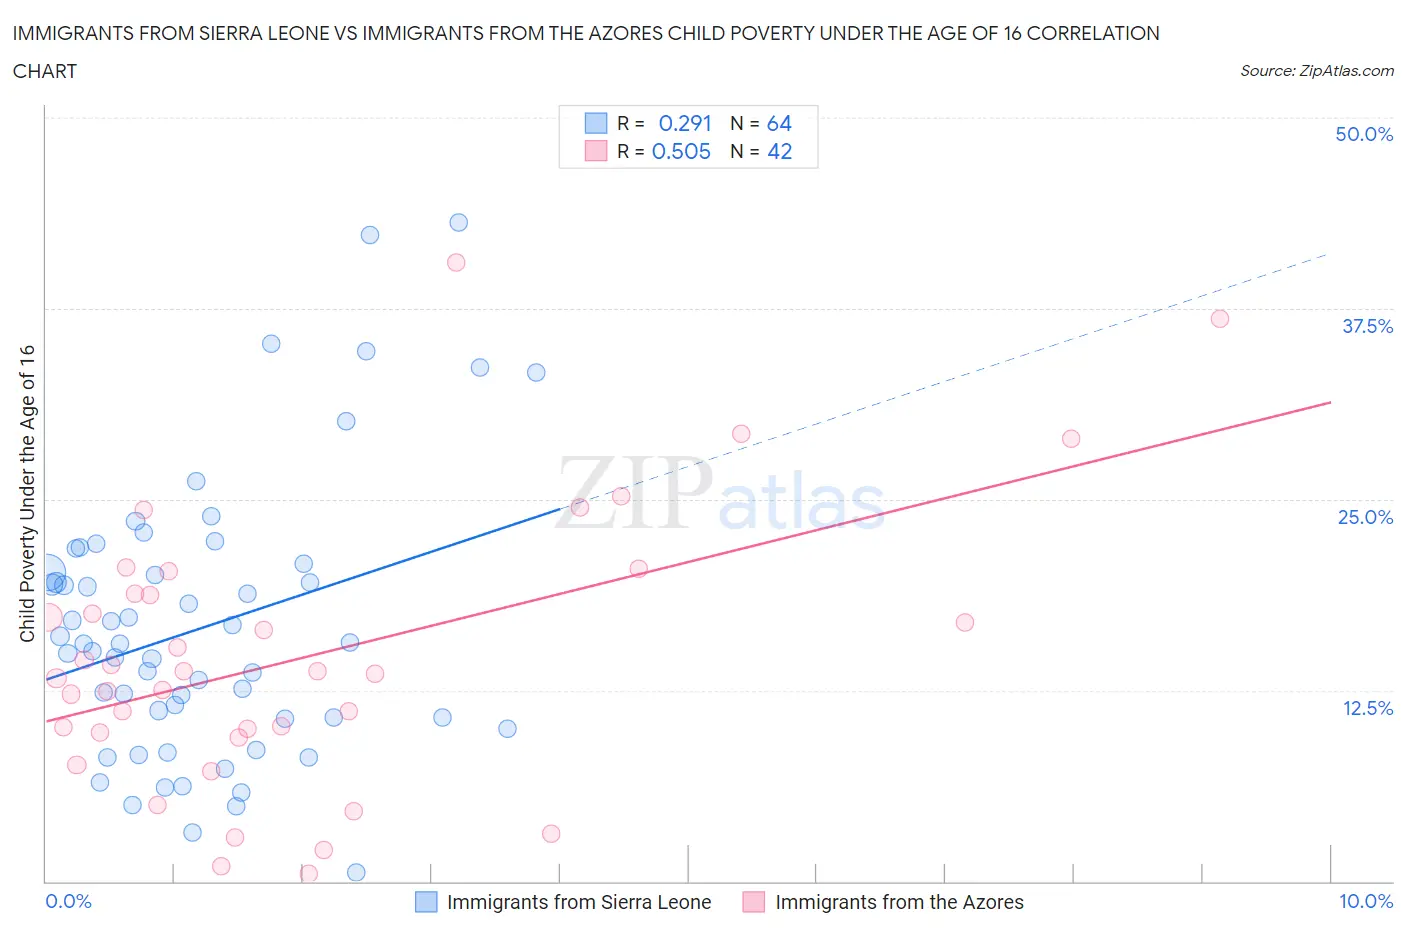 Immigrants from Sierra Leone vs Immigrants from the Azores Child Poverty Under the Age of 16